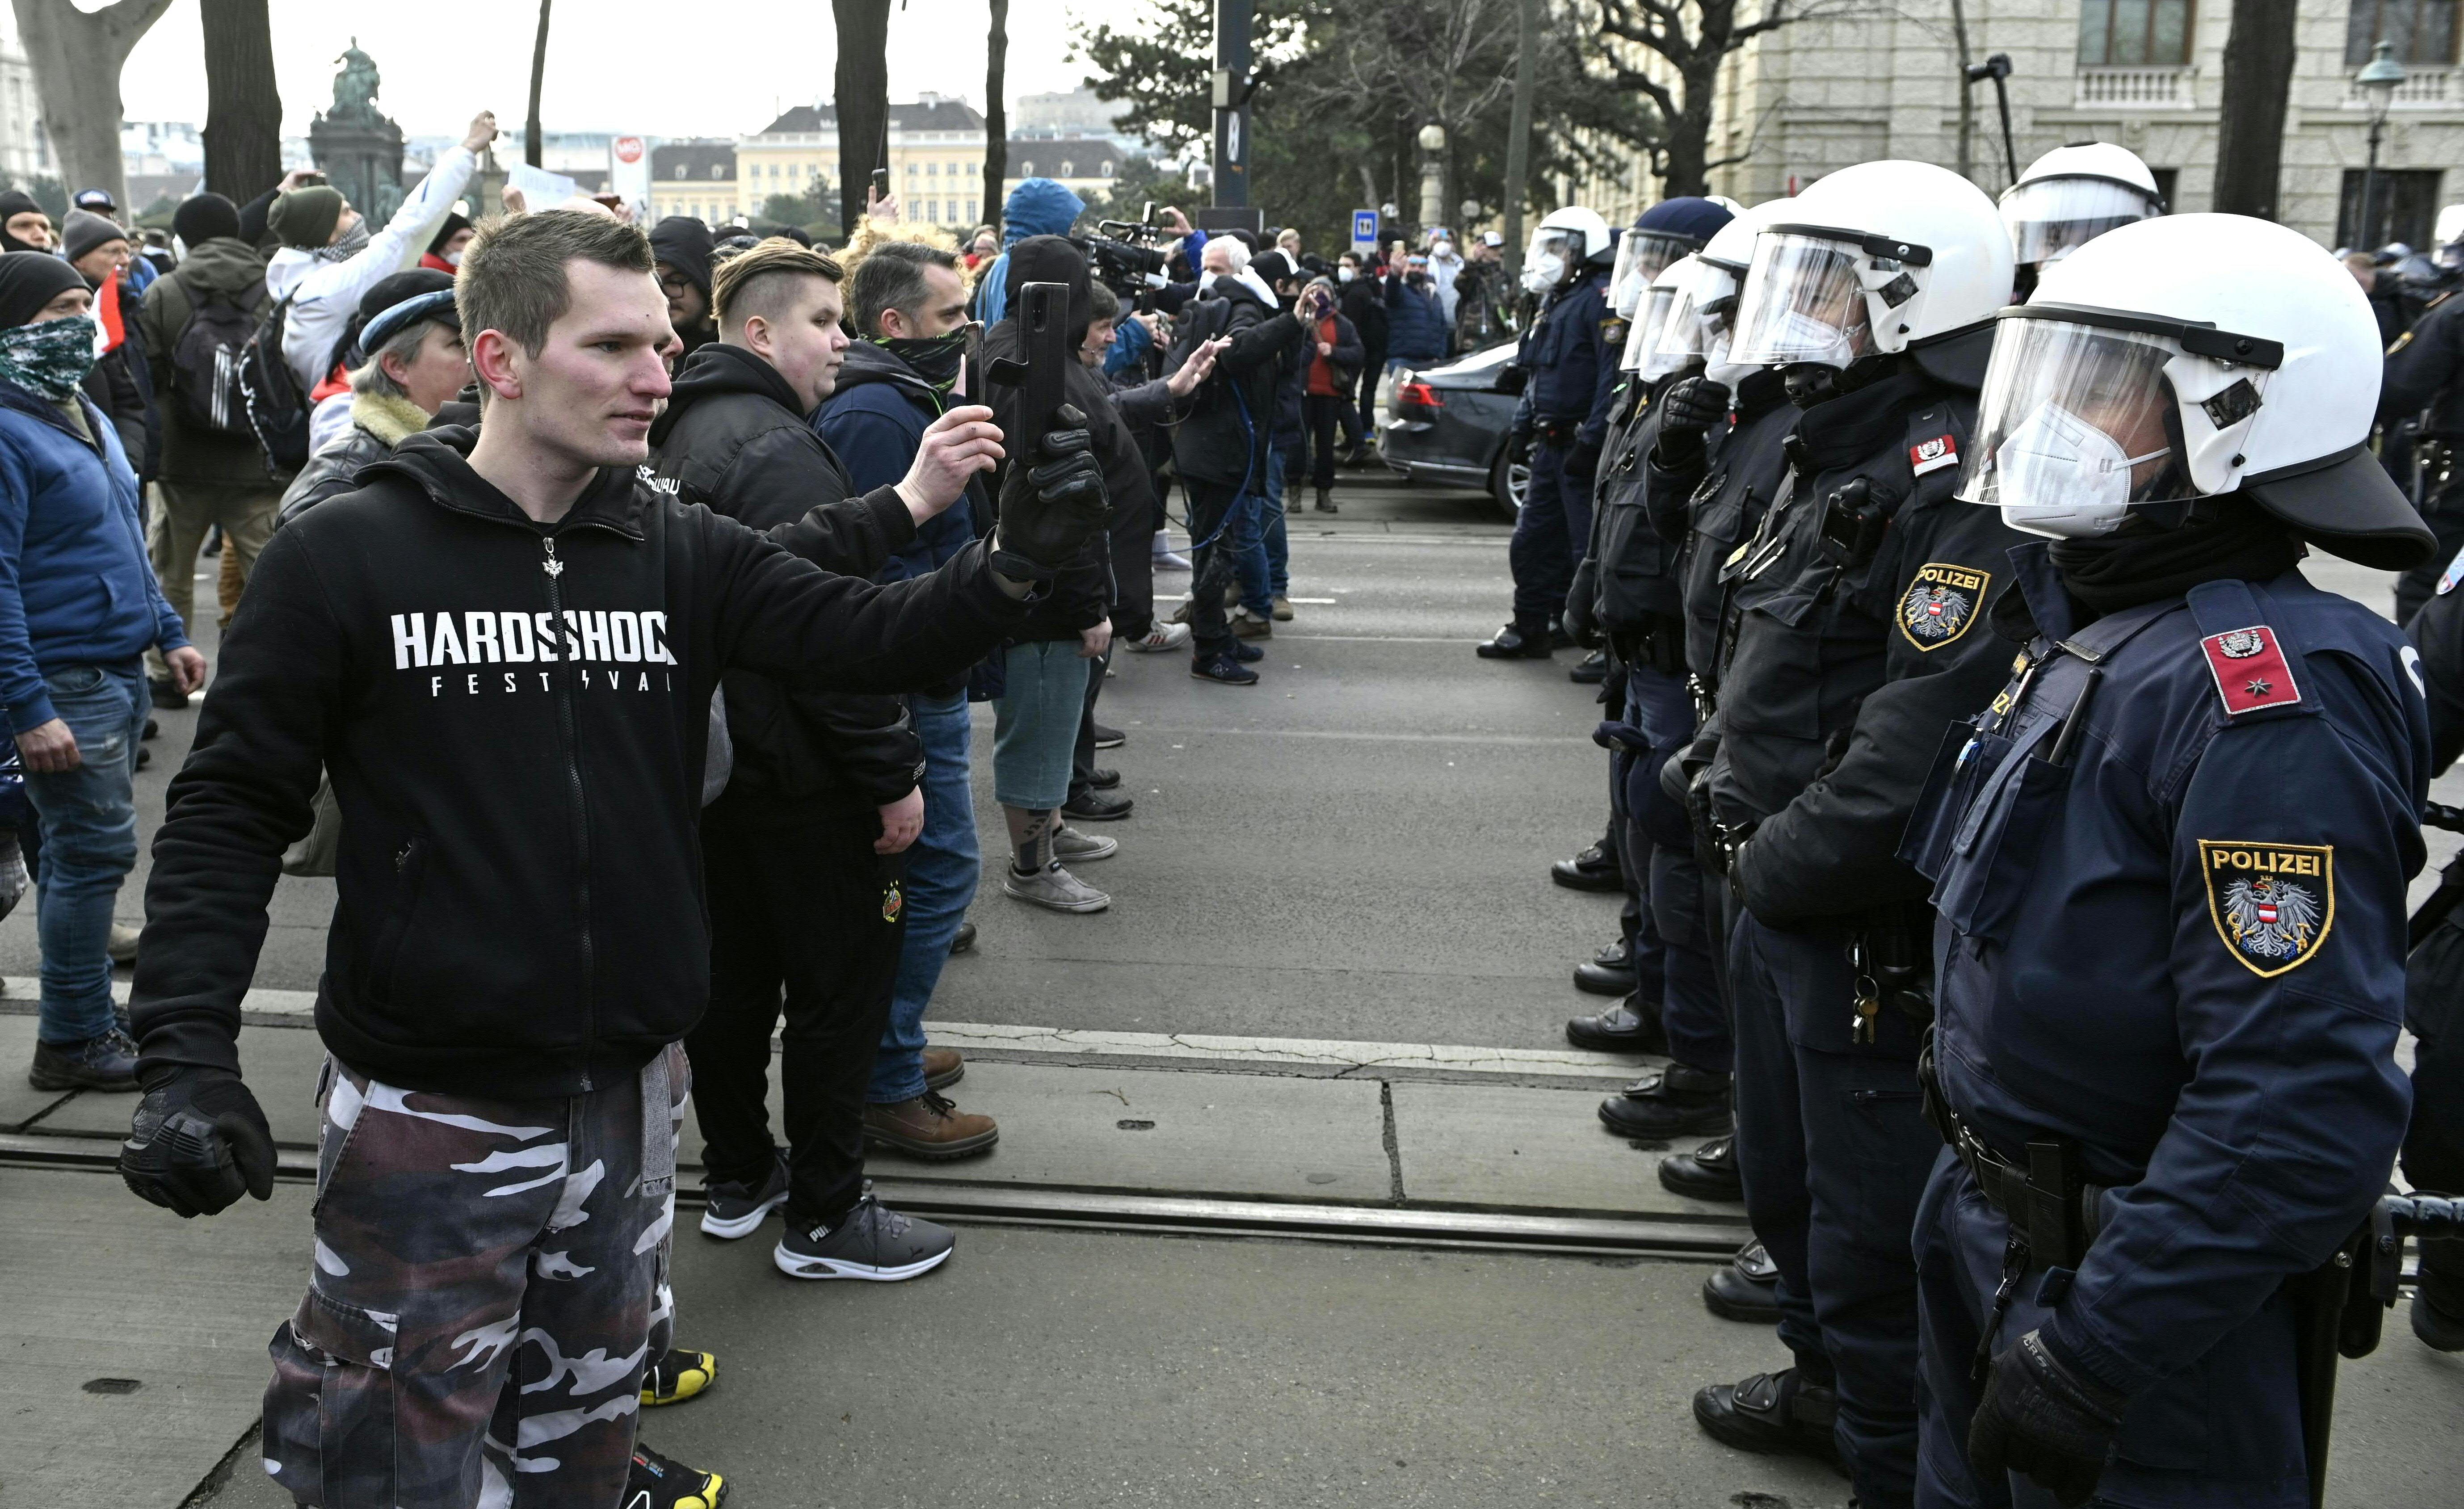 Austrian protesters take pictures of the police during a demonstration against Covid restrictions